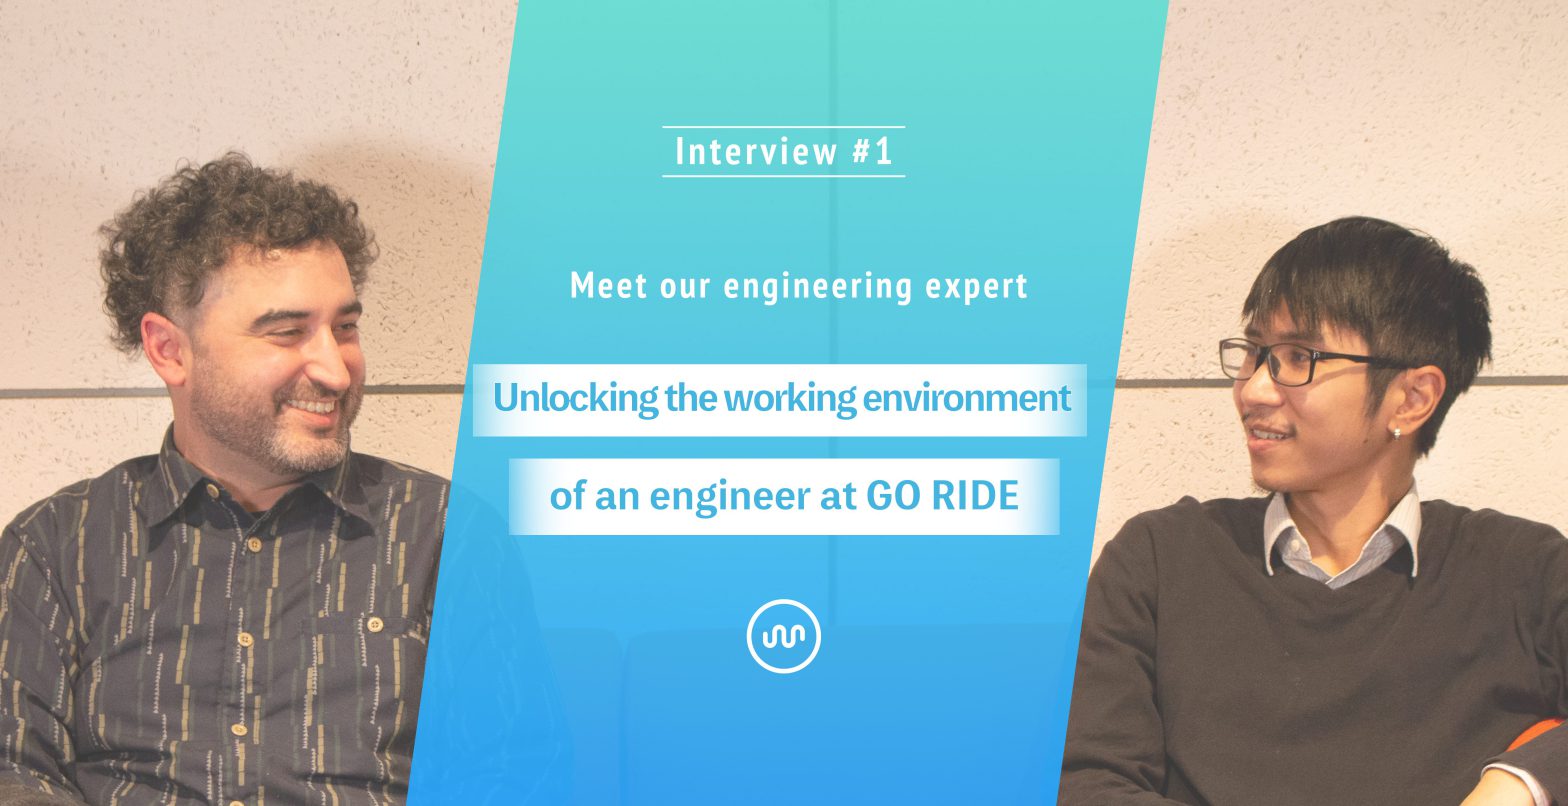 Meet our Engineering Expert Interviewing Our Engineering Expert